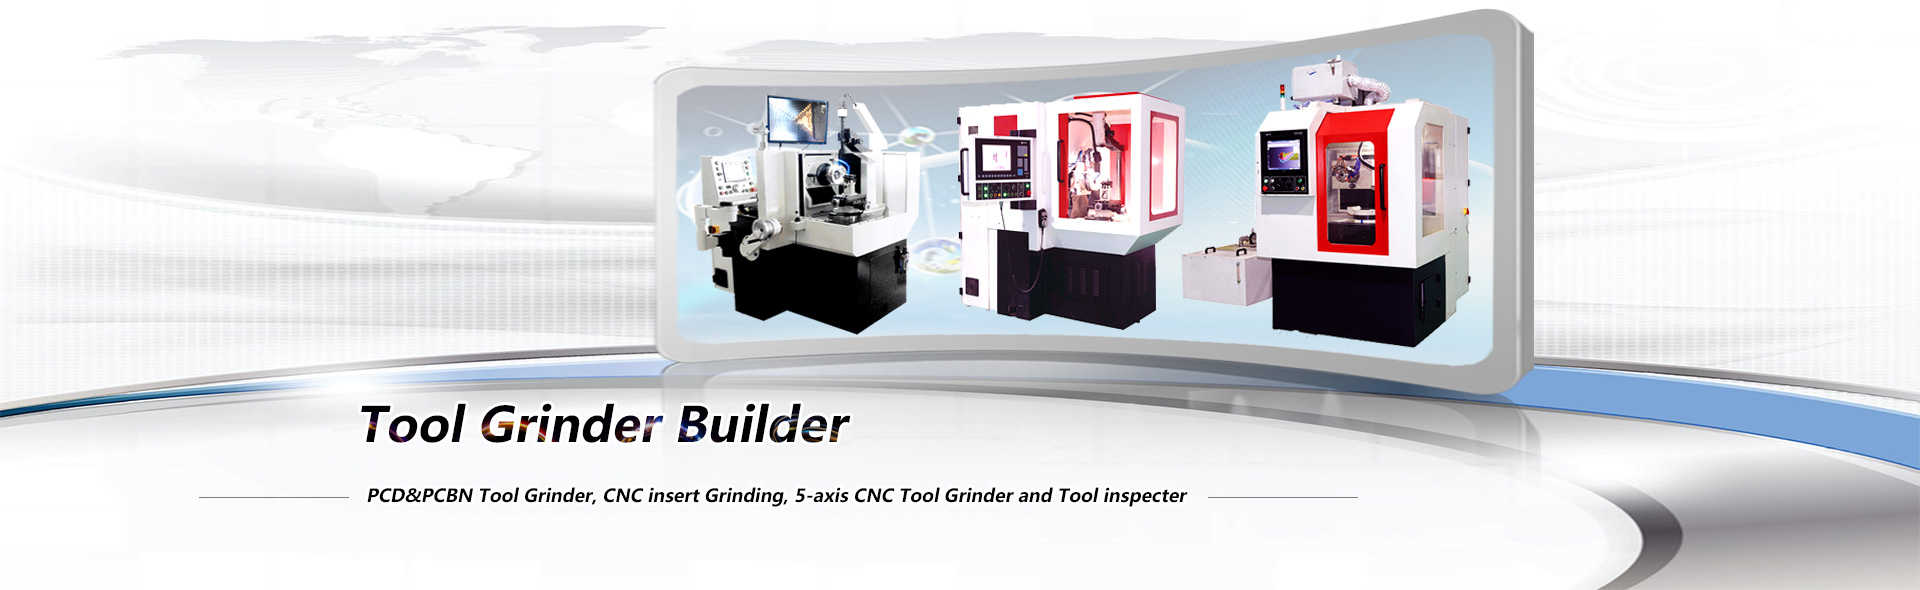 Features And Maintenance Of PP-60N Drill Sharpener